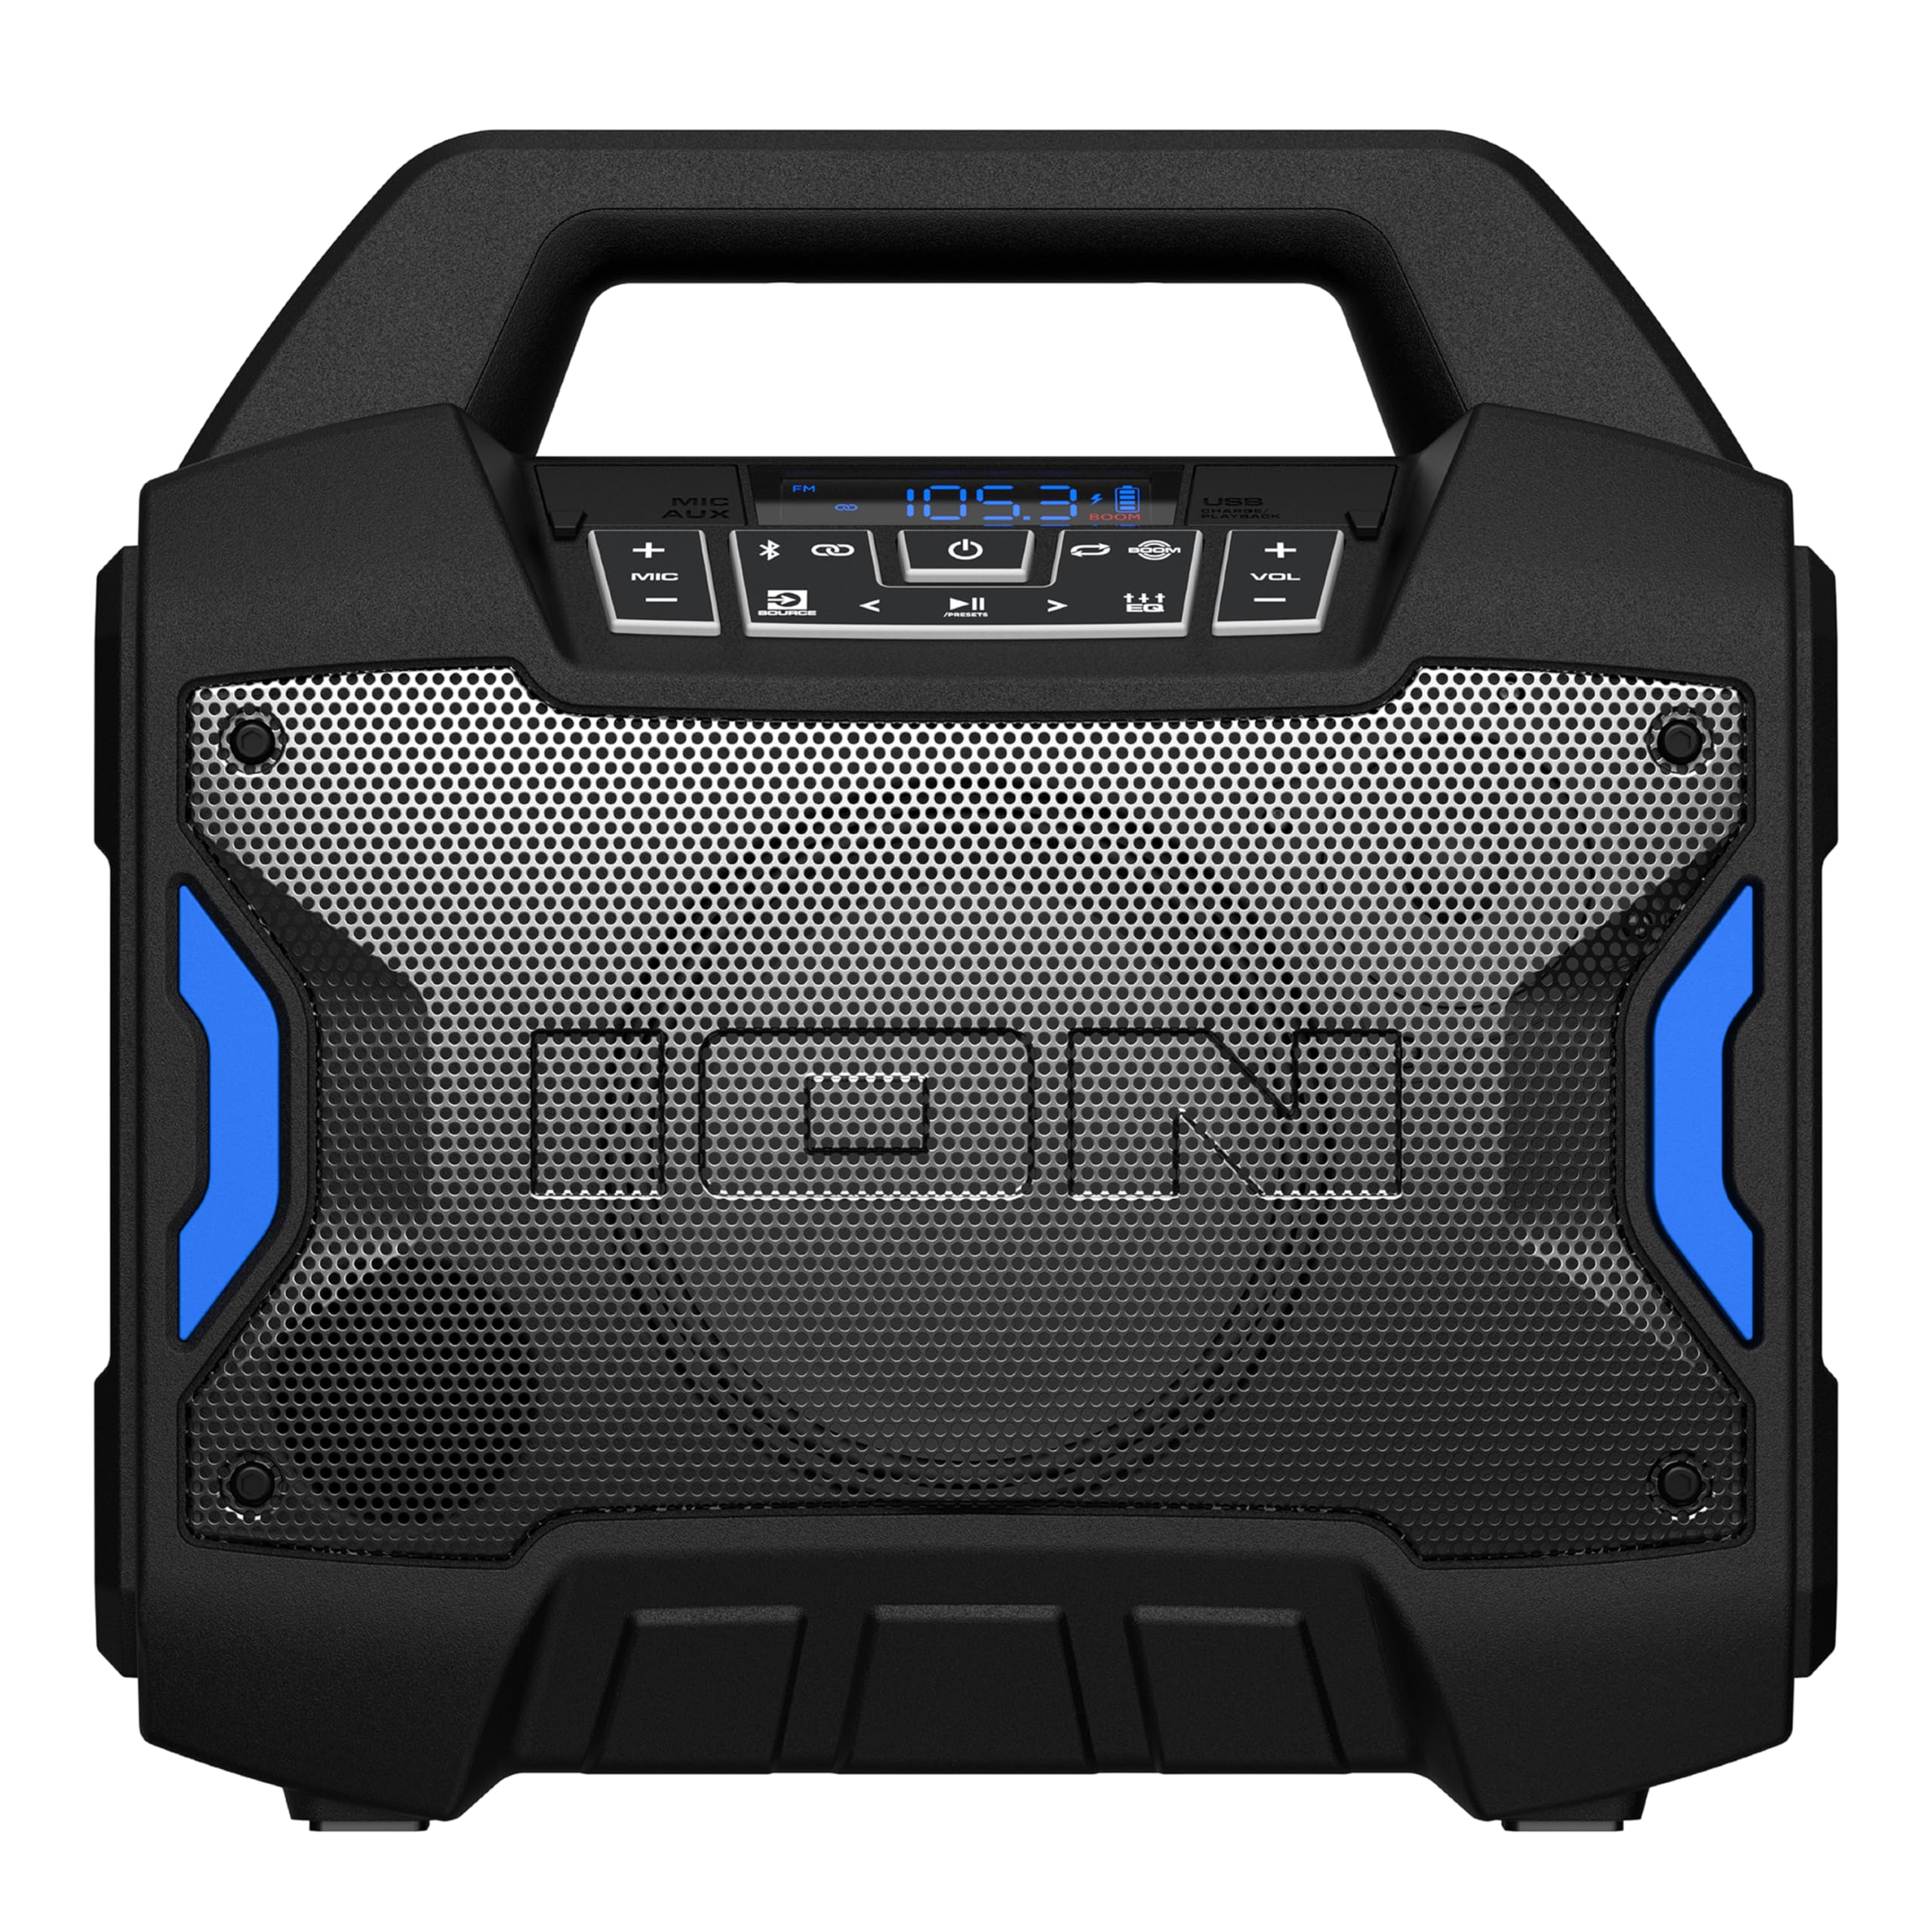 ION Tailgater Boom - Outdoor Portable Bluetooth Speaker with Mic in, FM Radio, USB Port, Battery, IPX5 Water-Resistant, Wireless Stereo-Link, App, 60W